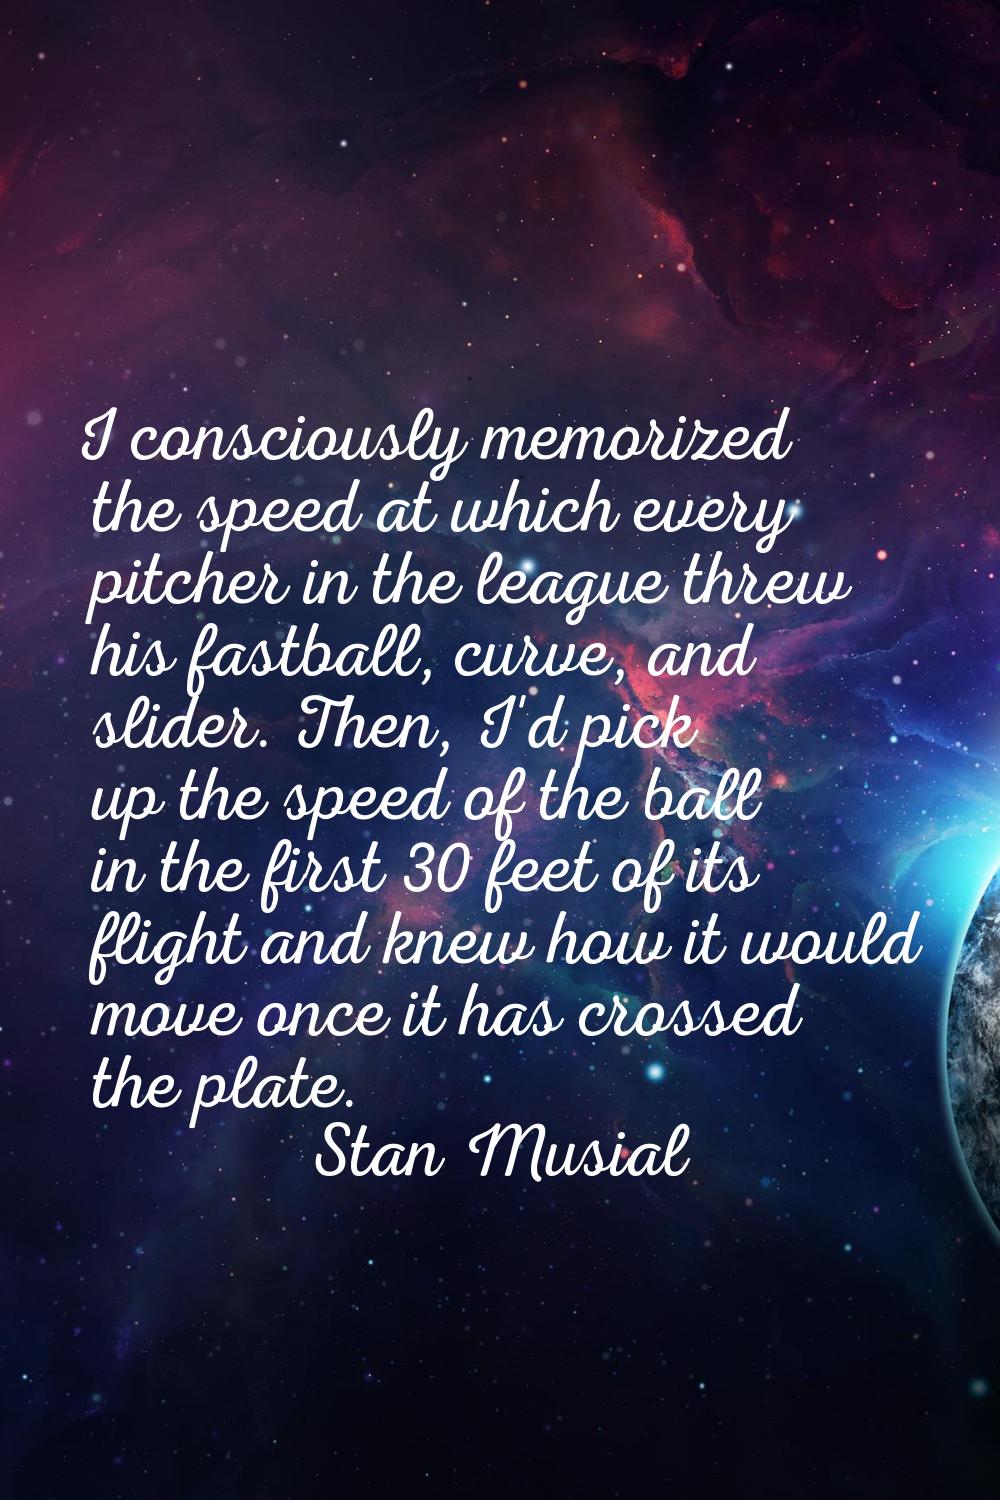 I consciously memorized the speed at which every pitcher in the league threw his fastball, curve, a